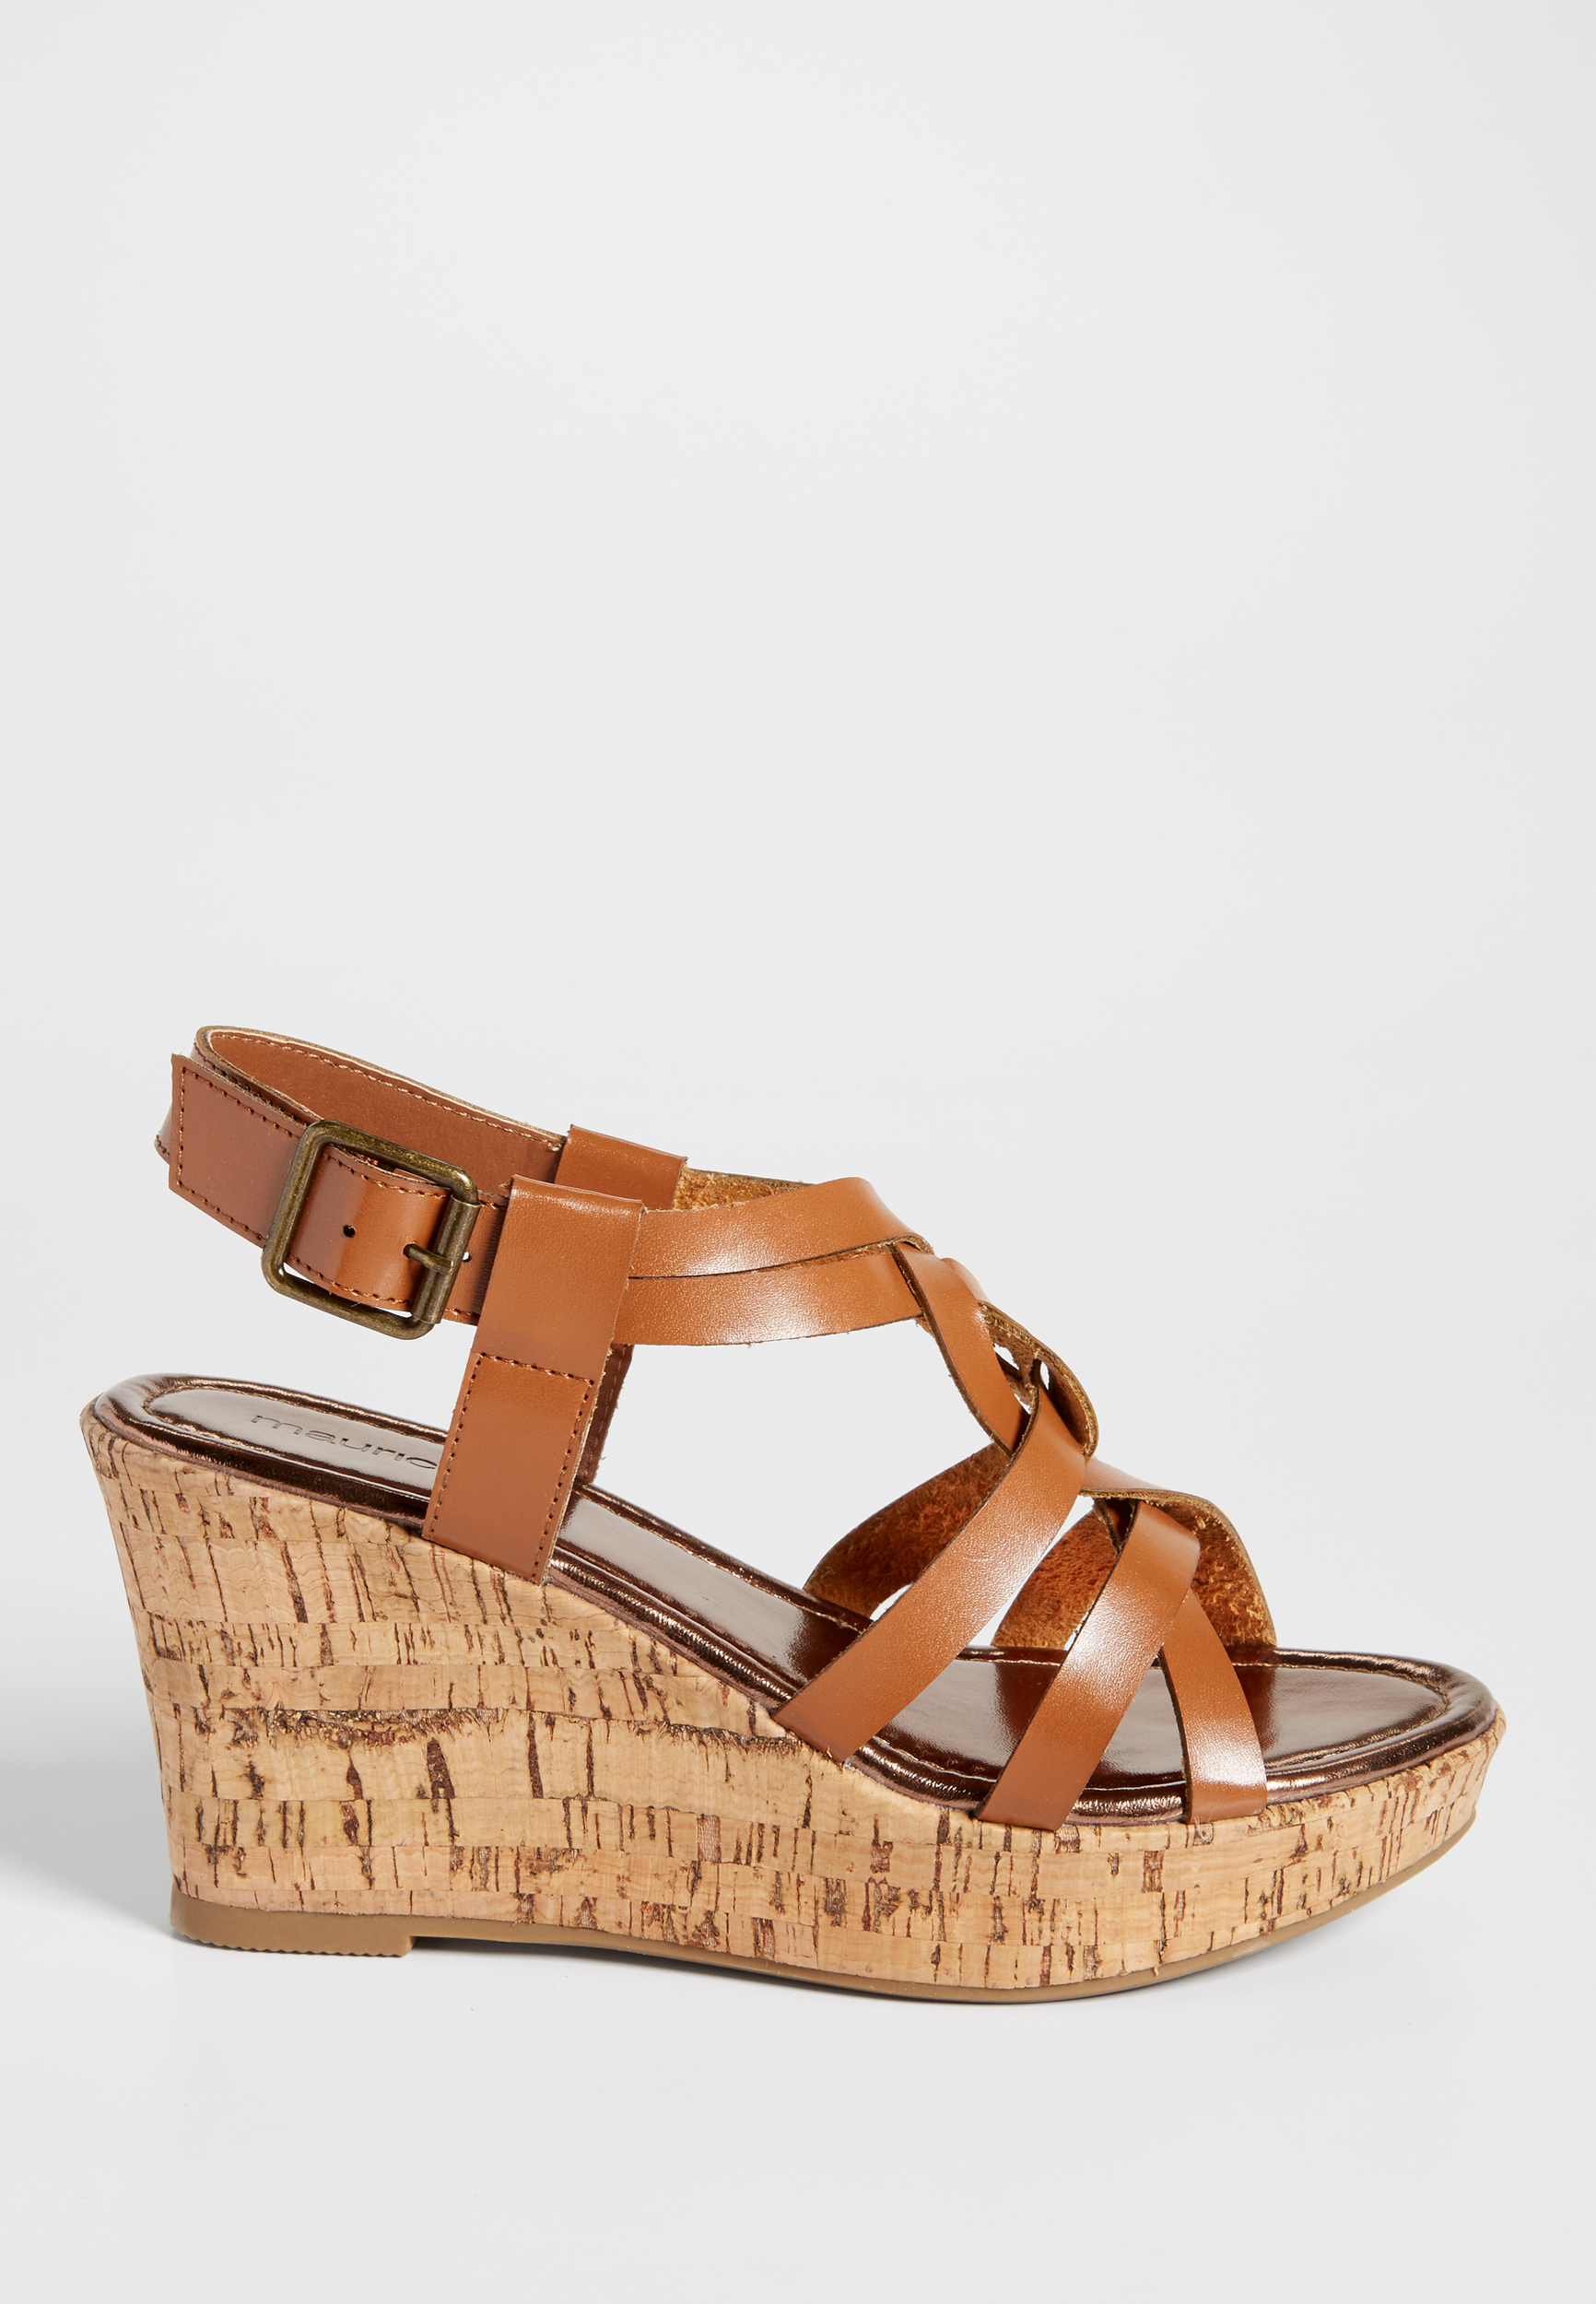 Elsa strappy cork wedge | maurices